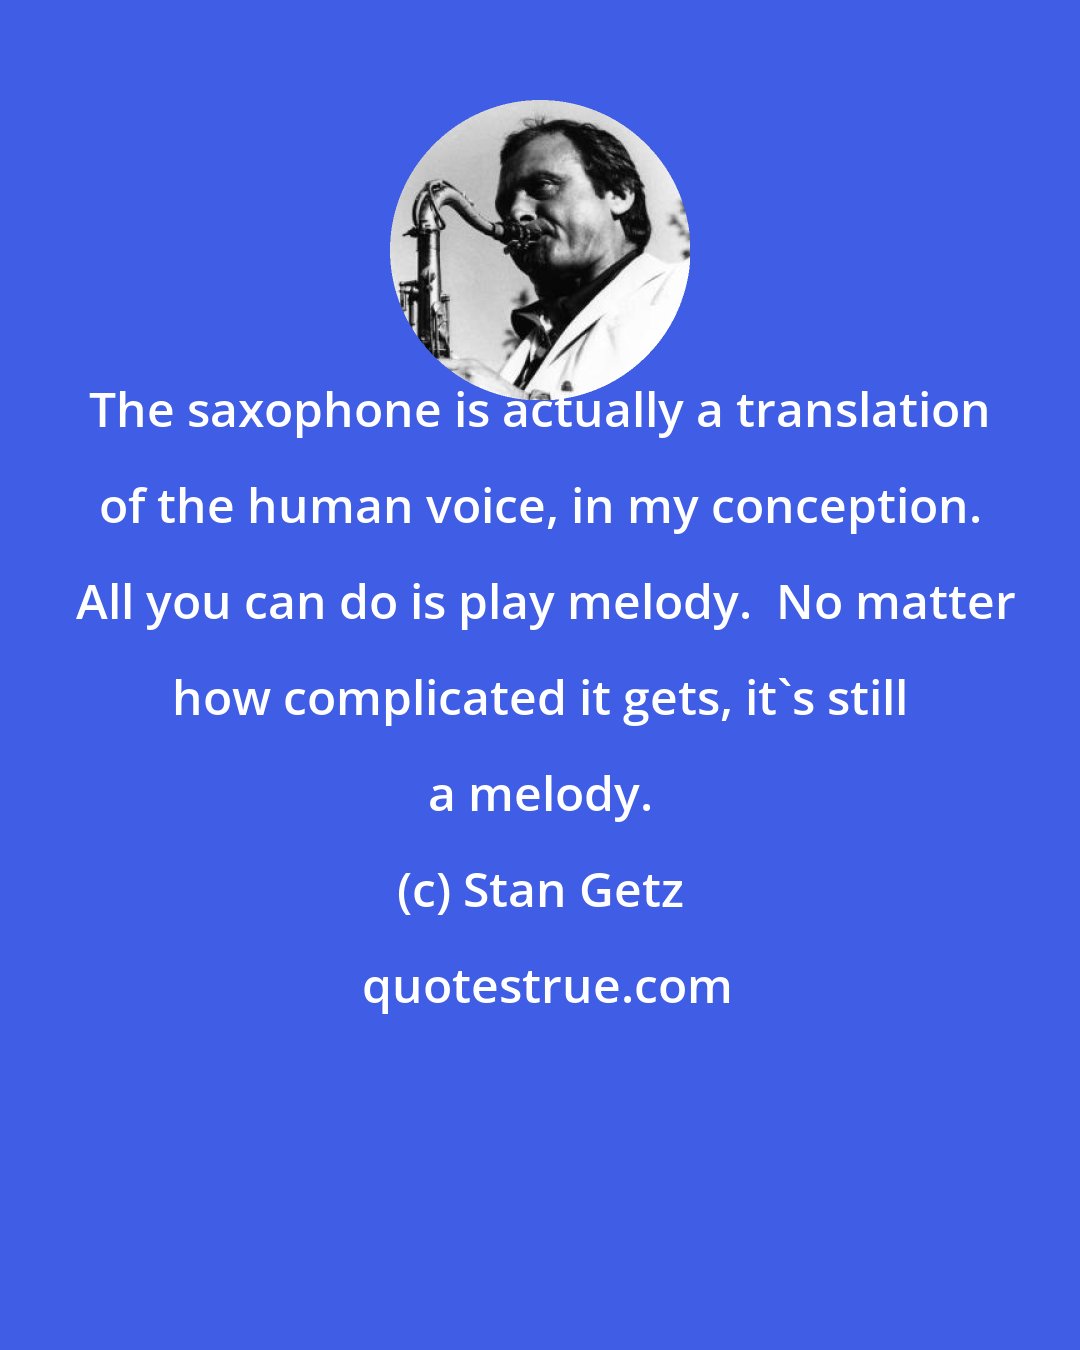 Stan Getz: The saxophone is actually a translation of the human voice, in my conception.  All you can do is play melody.  No matter how complicated it gets, it's still a melody.